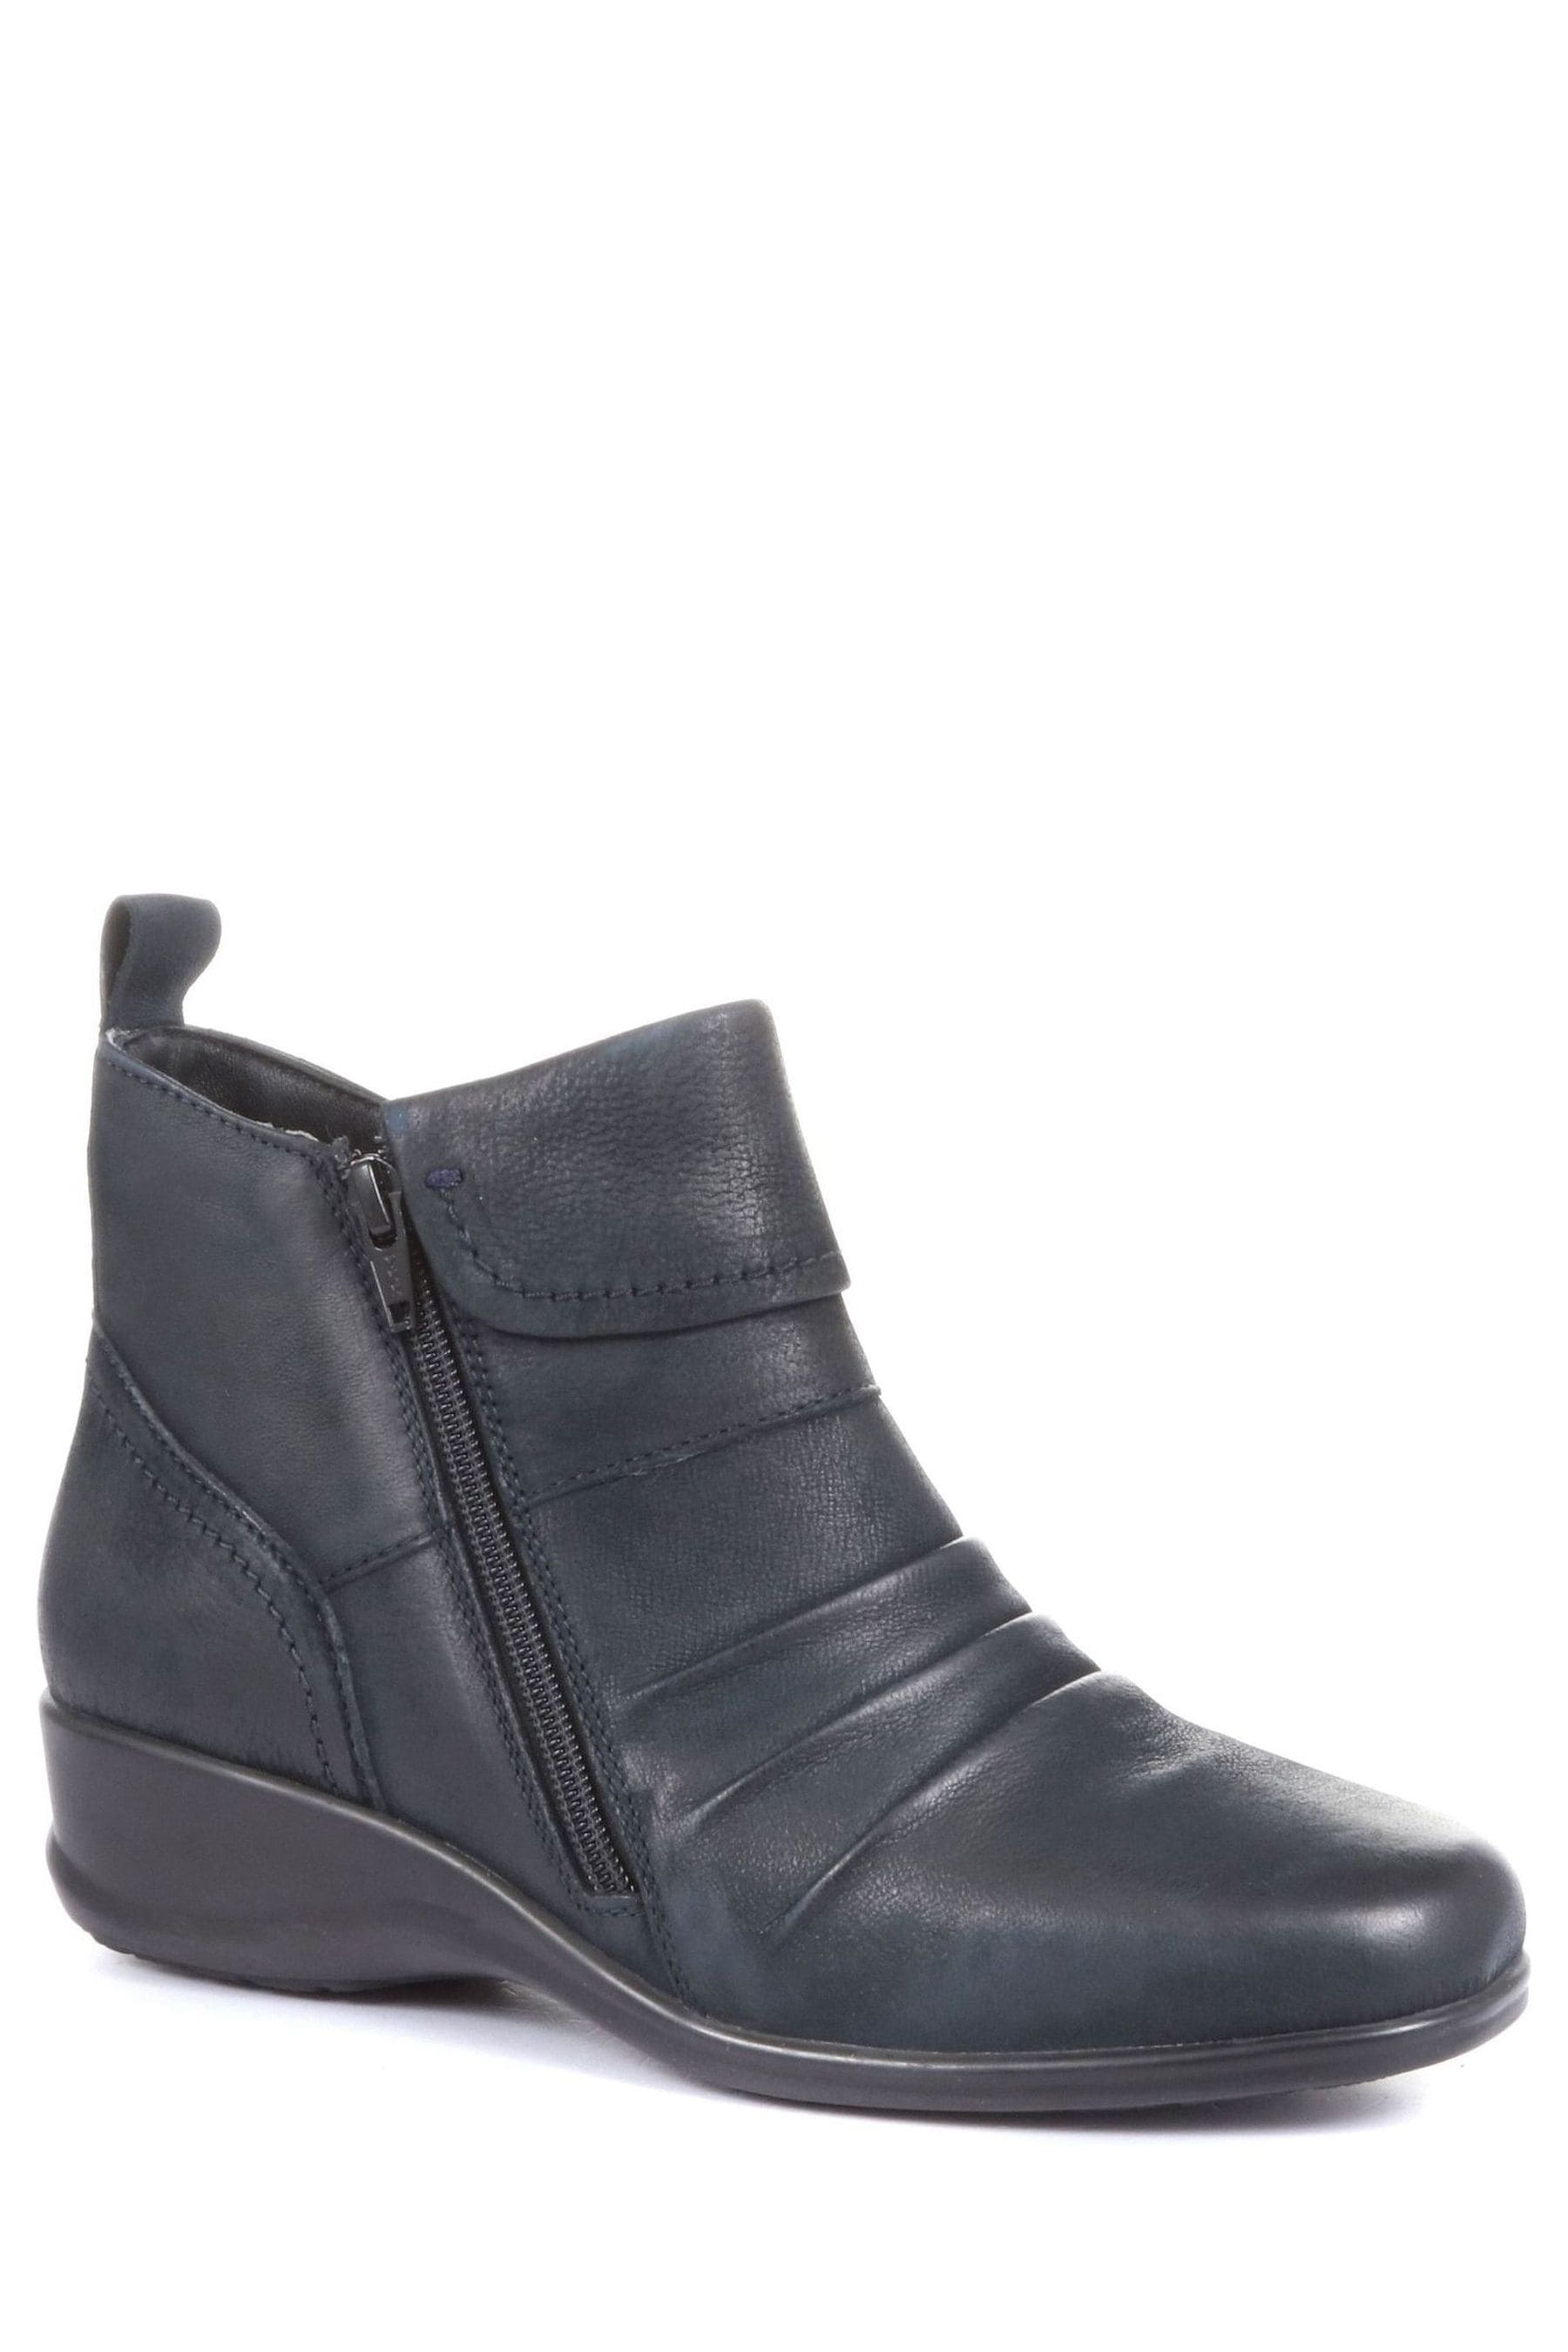 Buy Pavers Ladies Dual Zip Leather Ankle Boots from the Next UK online shop